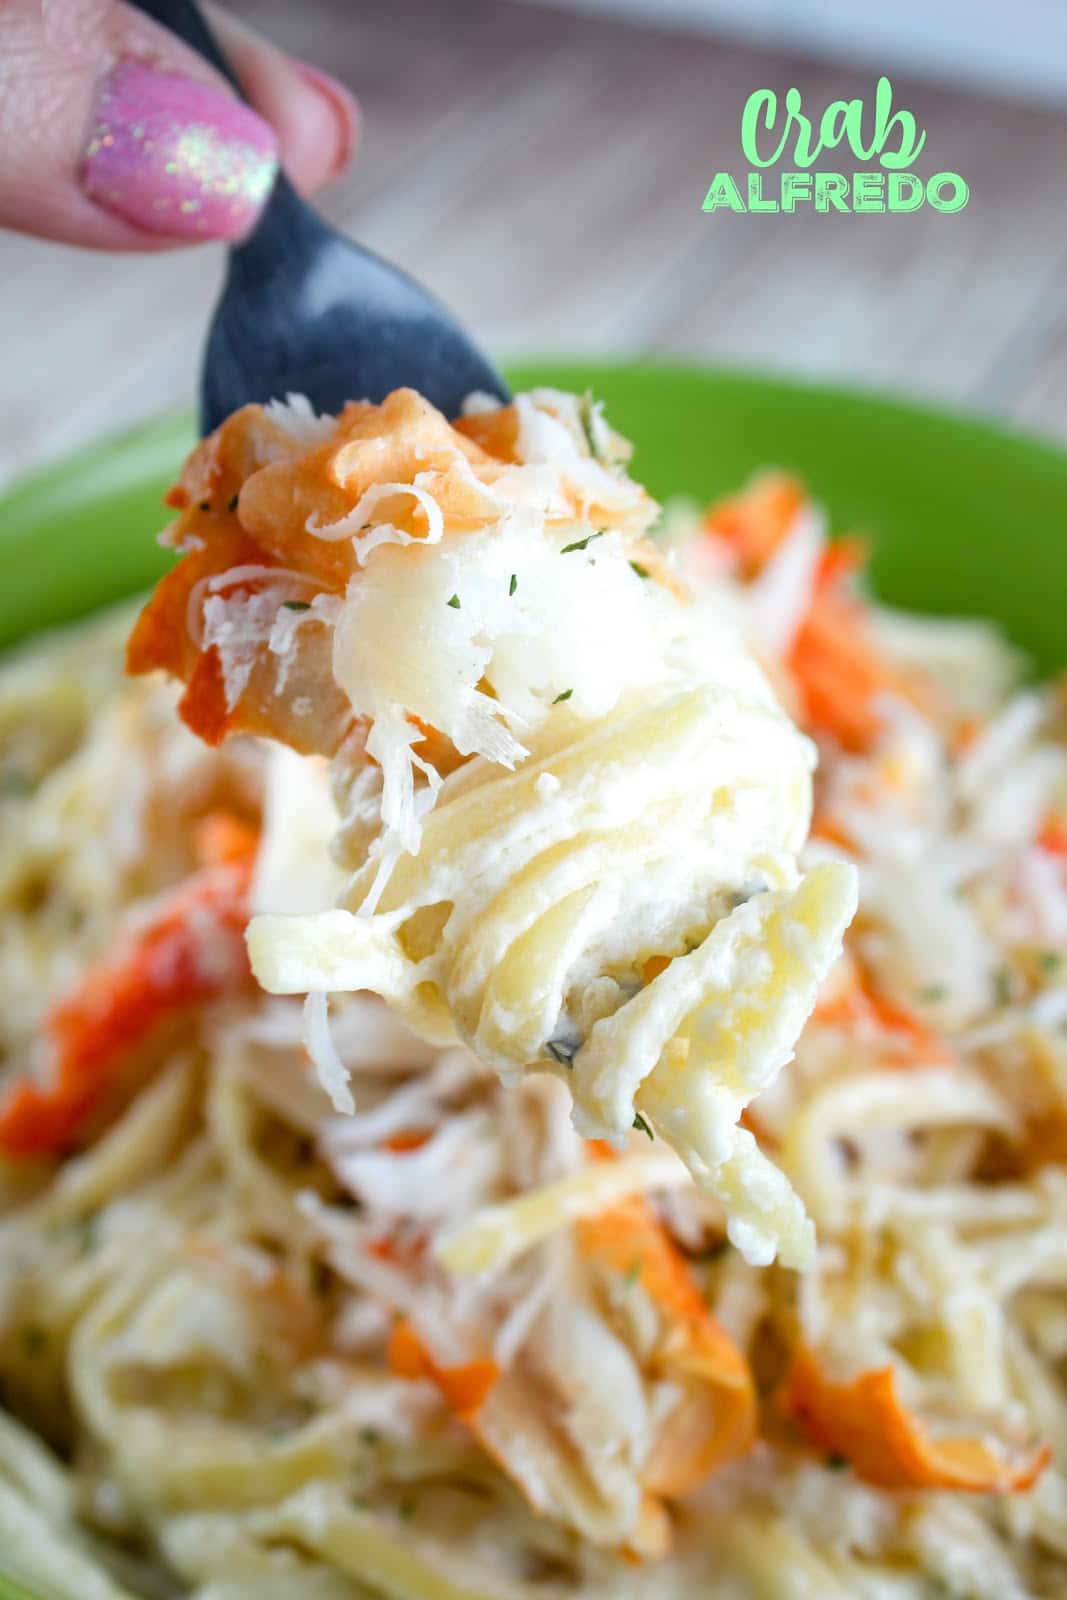 Red Lobster’s Crab Alfredo is just my absolute favorite! I order it every time I go! But it’s actually super simple to make at home – so now I can have it whenever I want…Yum!!!! (Crab legs are soooo easy to cook too!) via @foodhussy